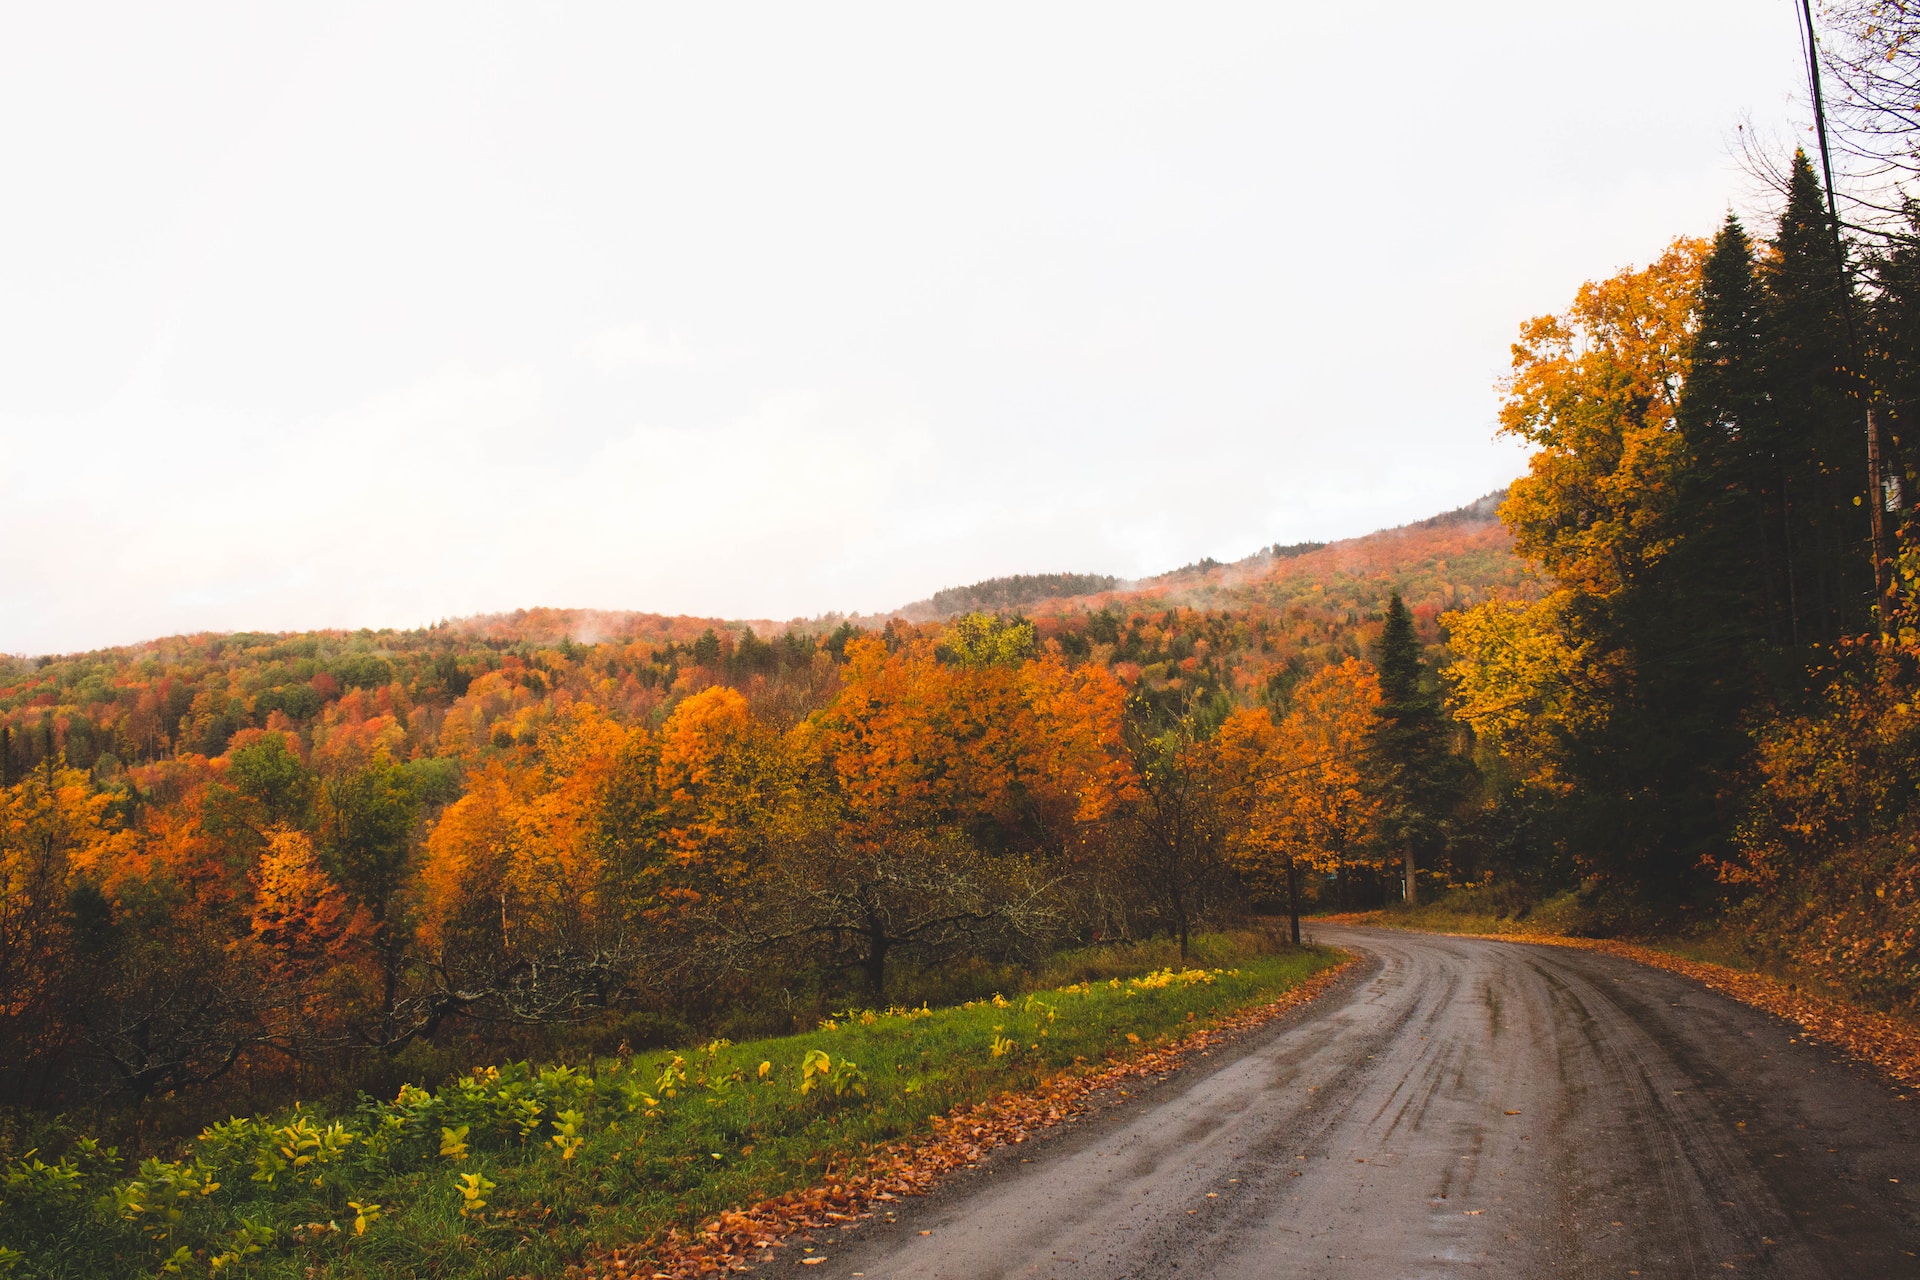 There are many scenic roads in Vermont.